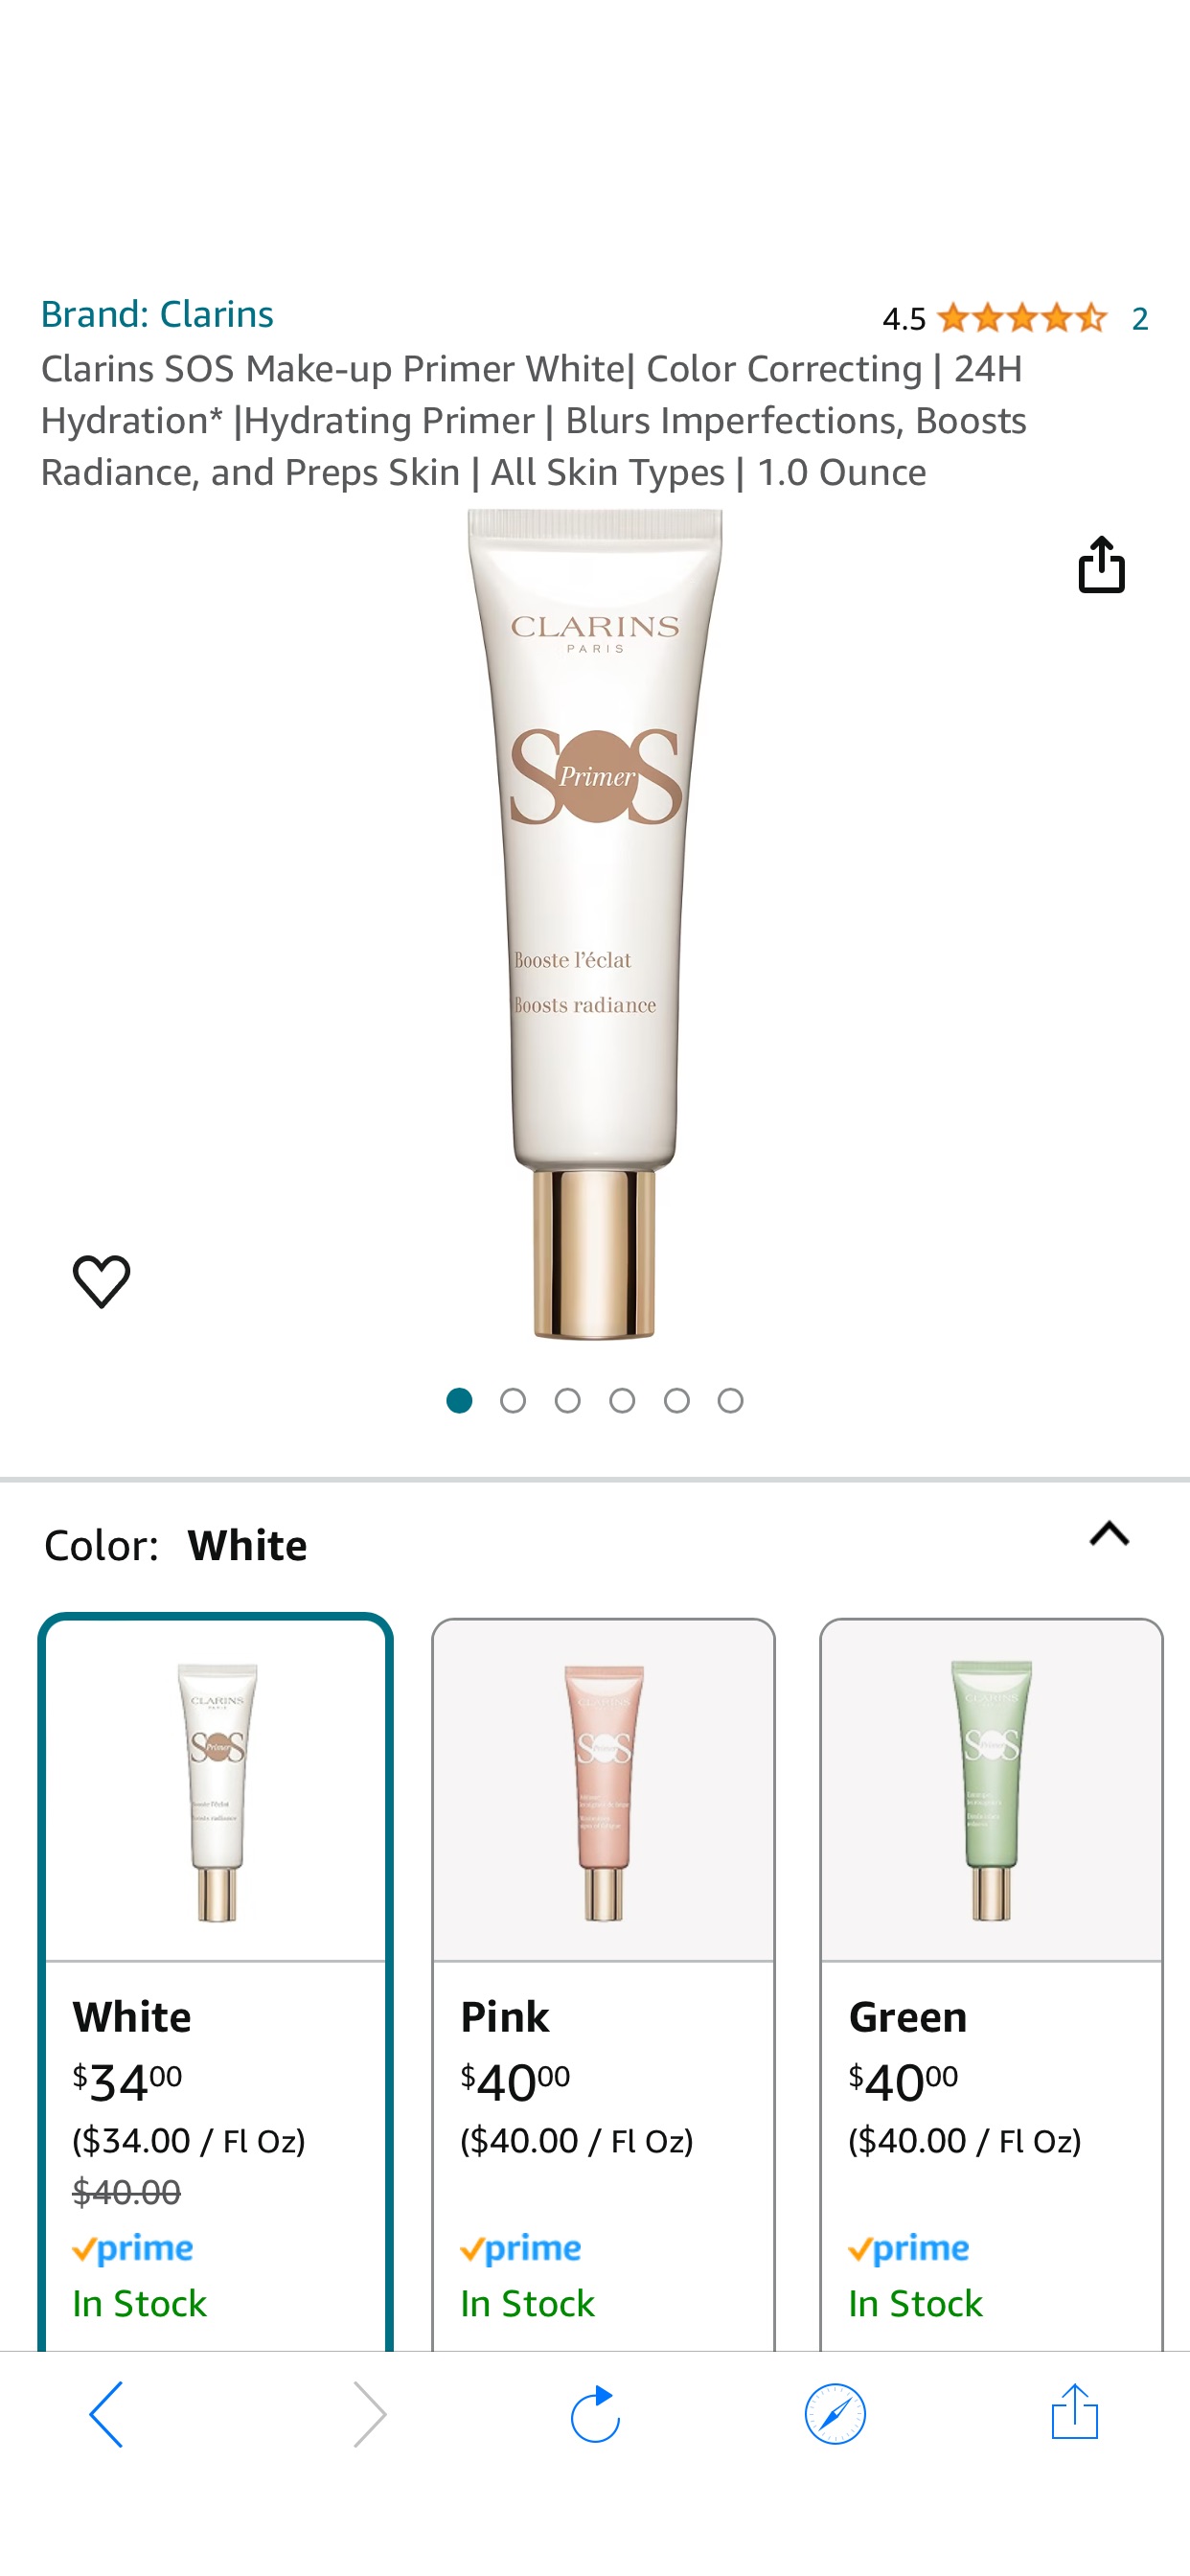 Amazon.com: Clarins SOS Make-up Primer White| Color Correcting | 24H Hydration* |Hydrating Primer | Blurs Imperfections, Boosts Radiance, and Preps Skin | All Skin Types | 1.0 Ounce : Beauty & Persona